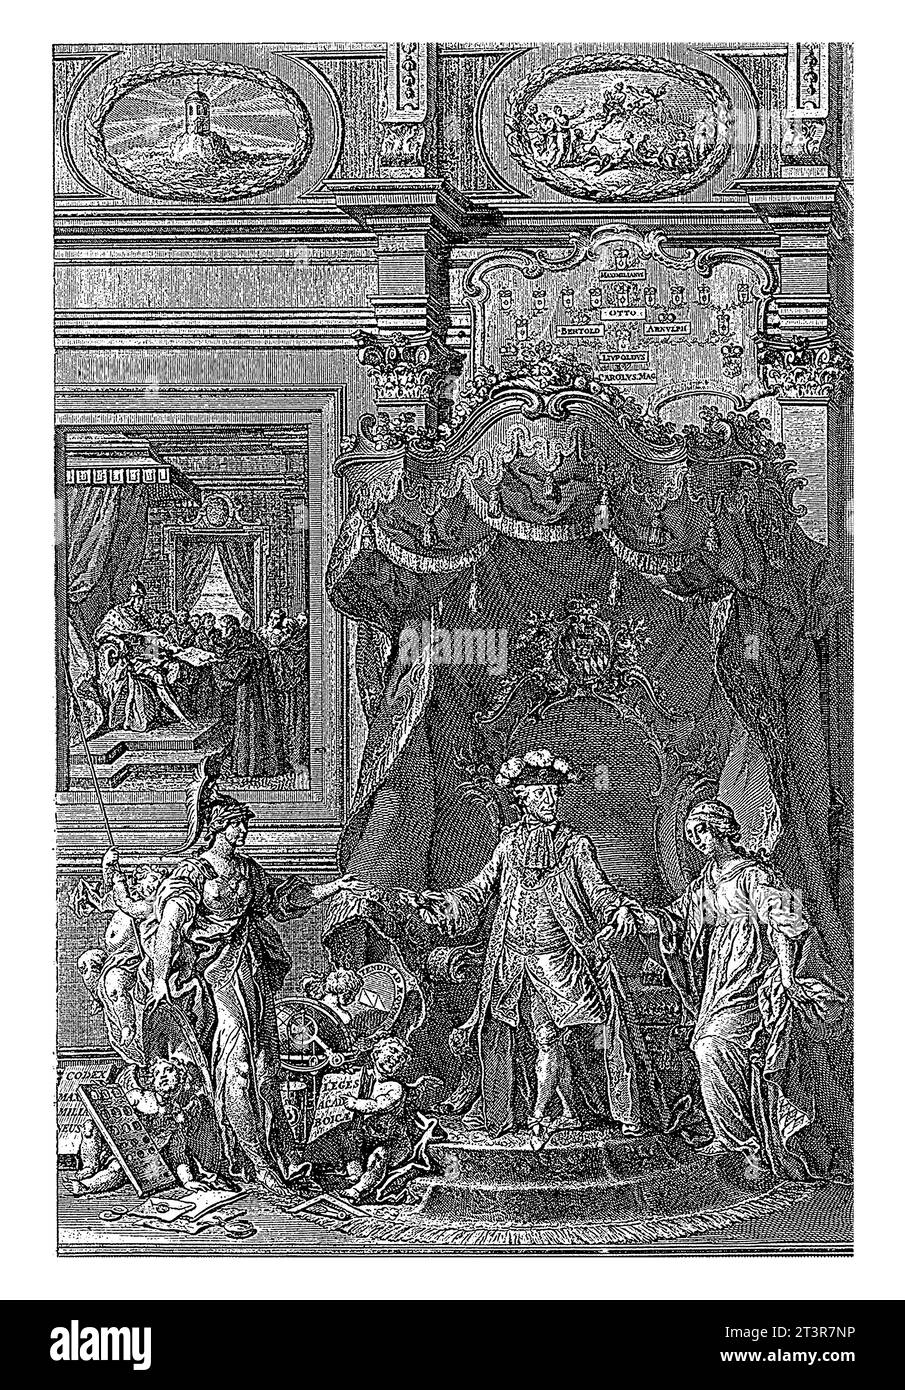 Portrait of Maximilian III Joseph, Elector of Bavaria with allegories, Johann Esaias Nilson, 1774 The Elector leads the personification of Bavaria. Stock Photo